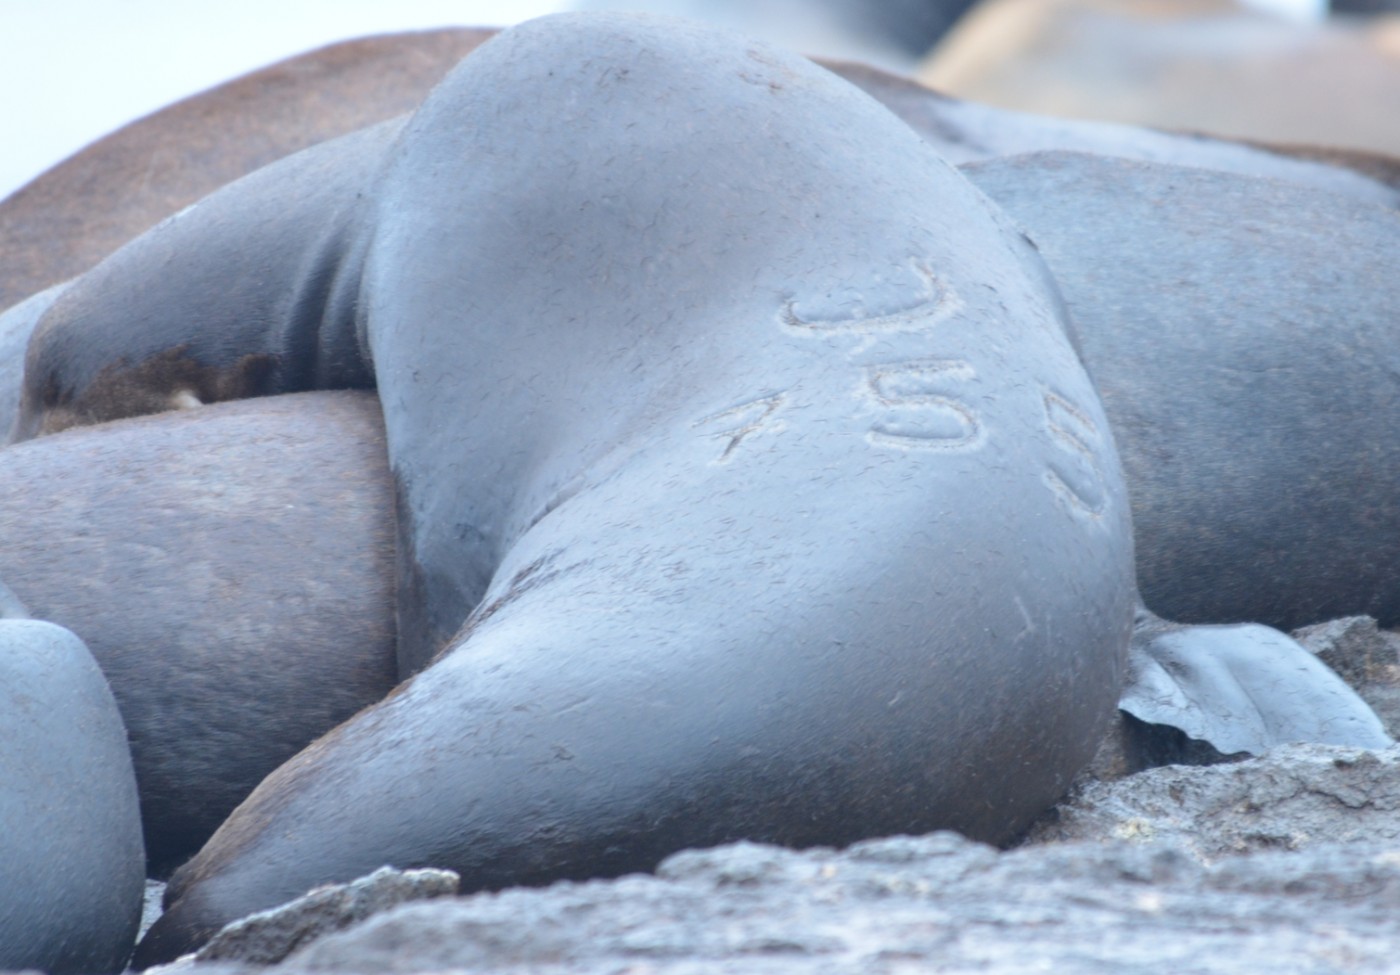 California Sea Lion with brand U755. The U is also a C and indicates the animal was branded as a weaner near the Columbia River.